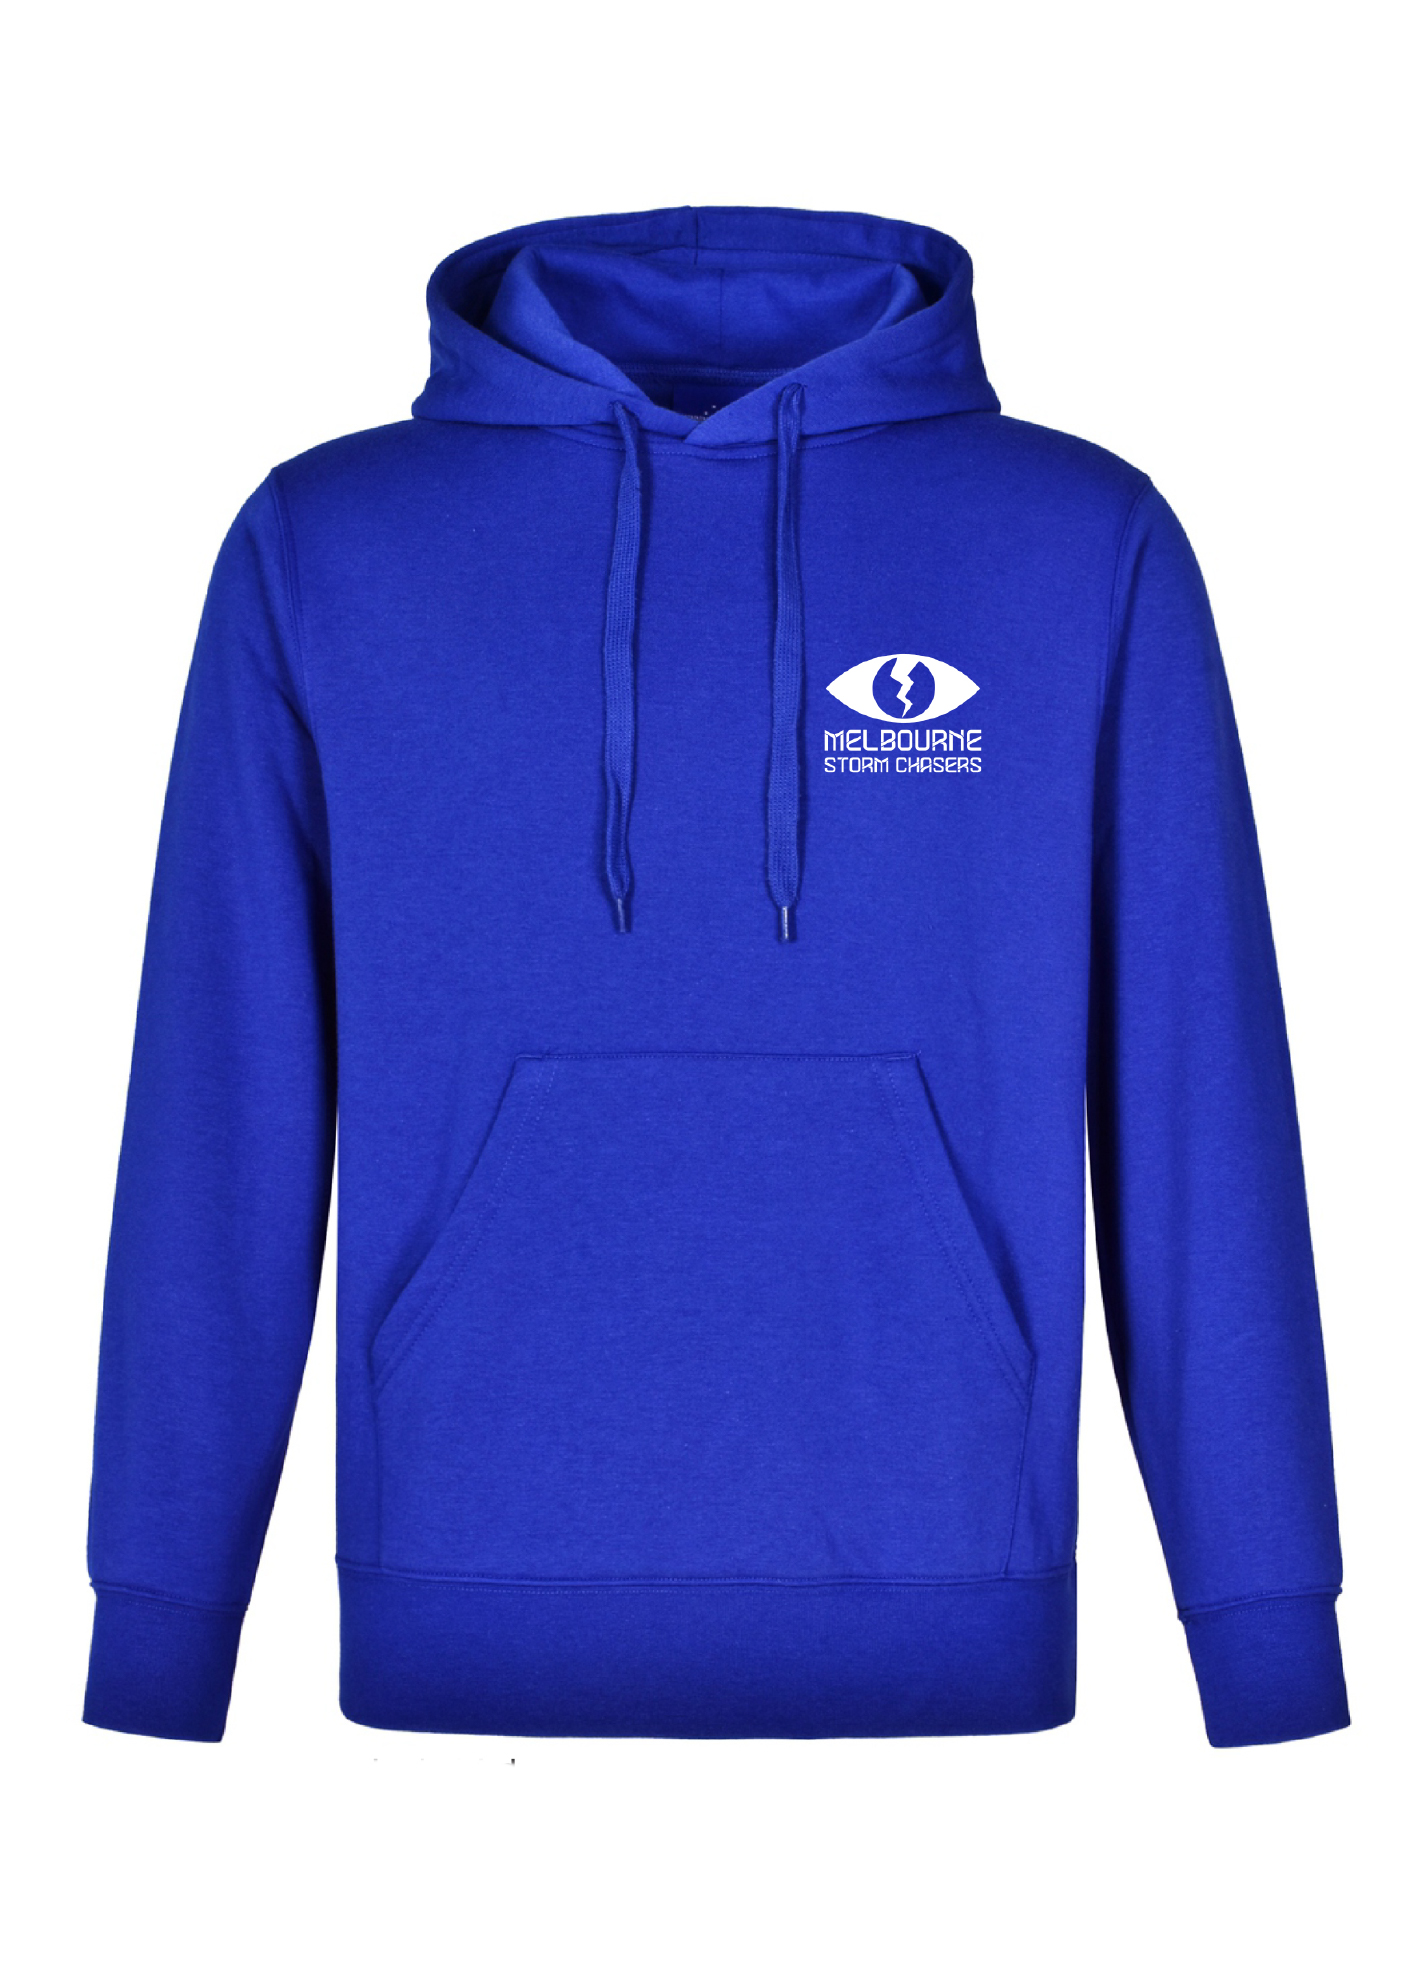 Hoodies - Melbourne Storm Chasers